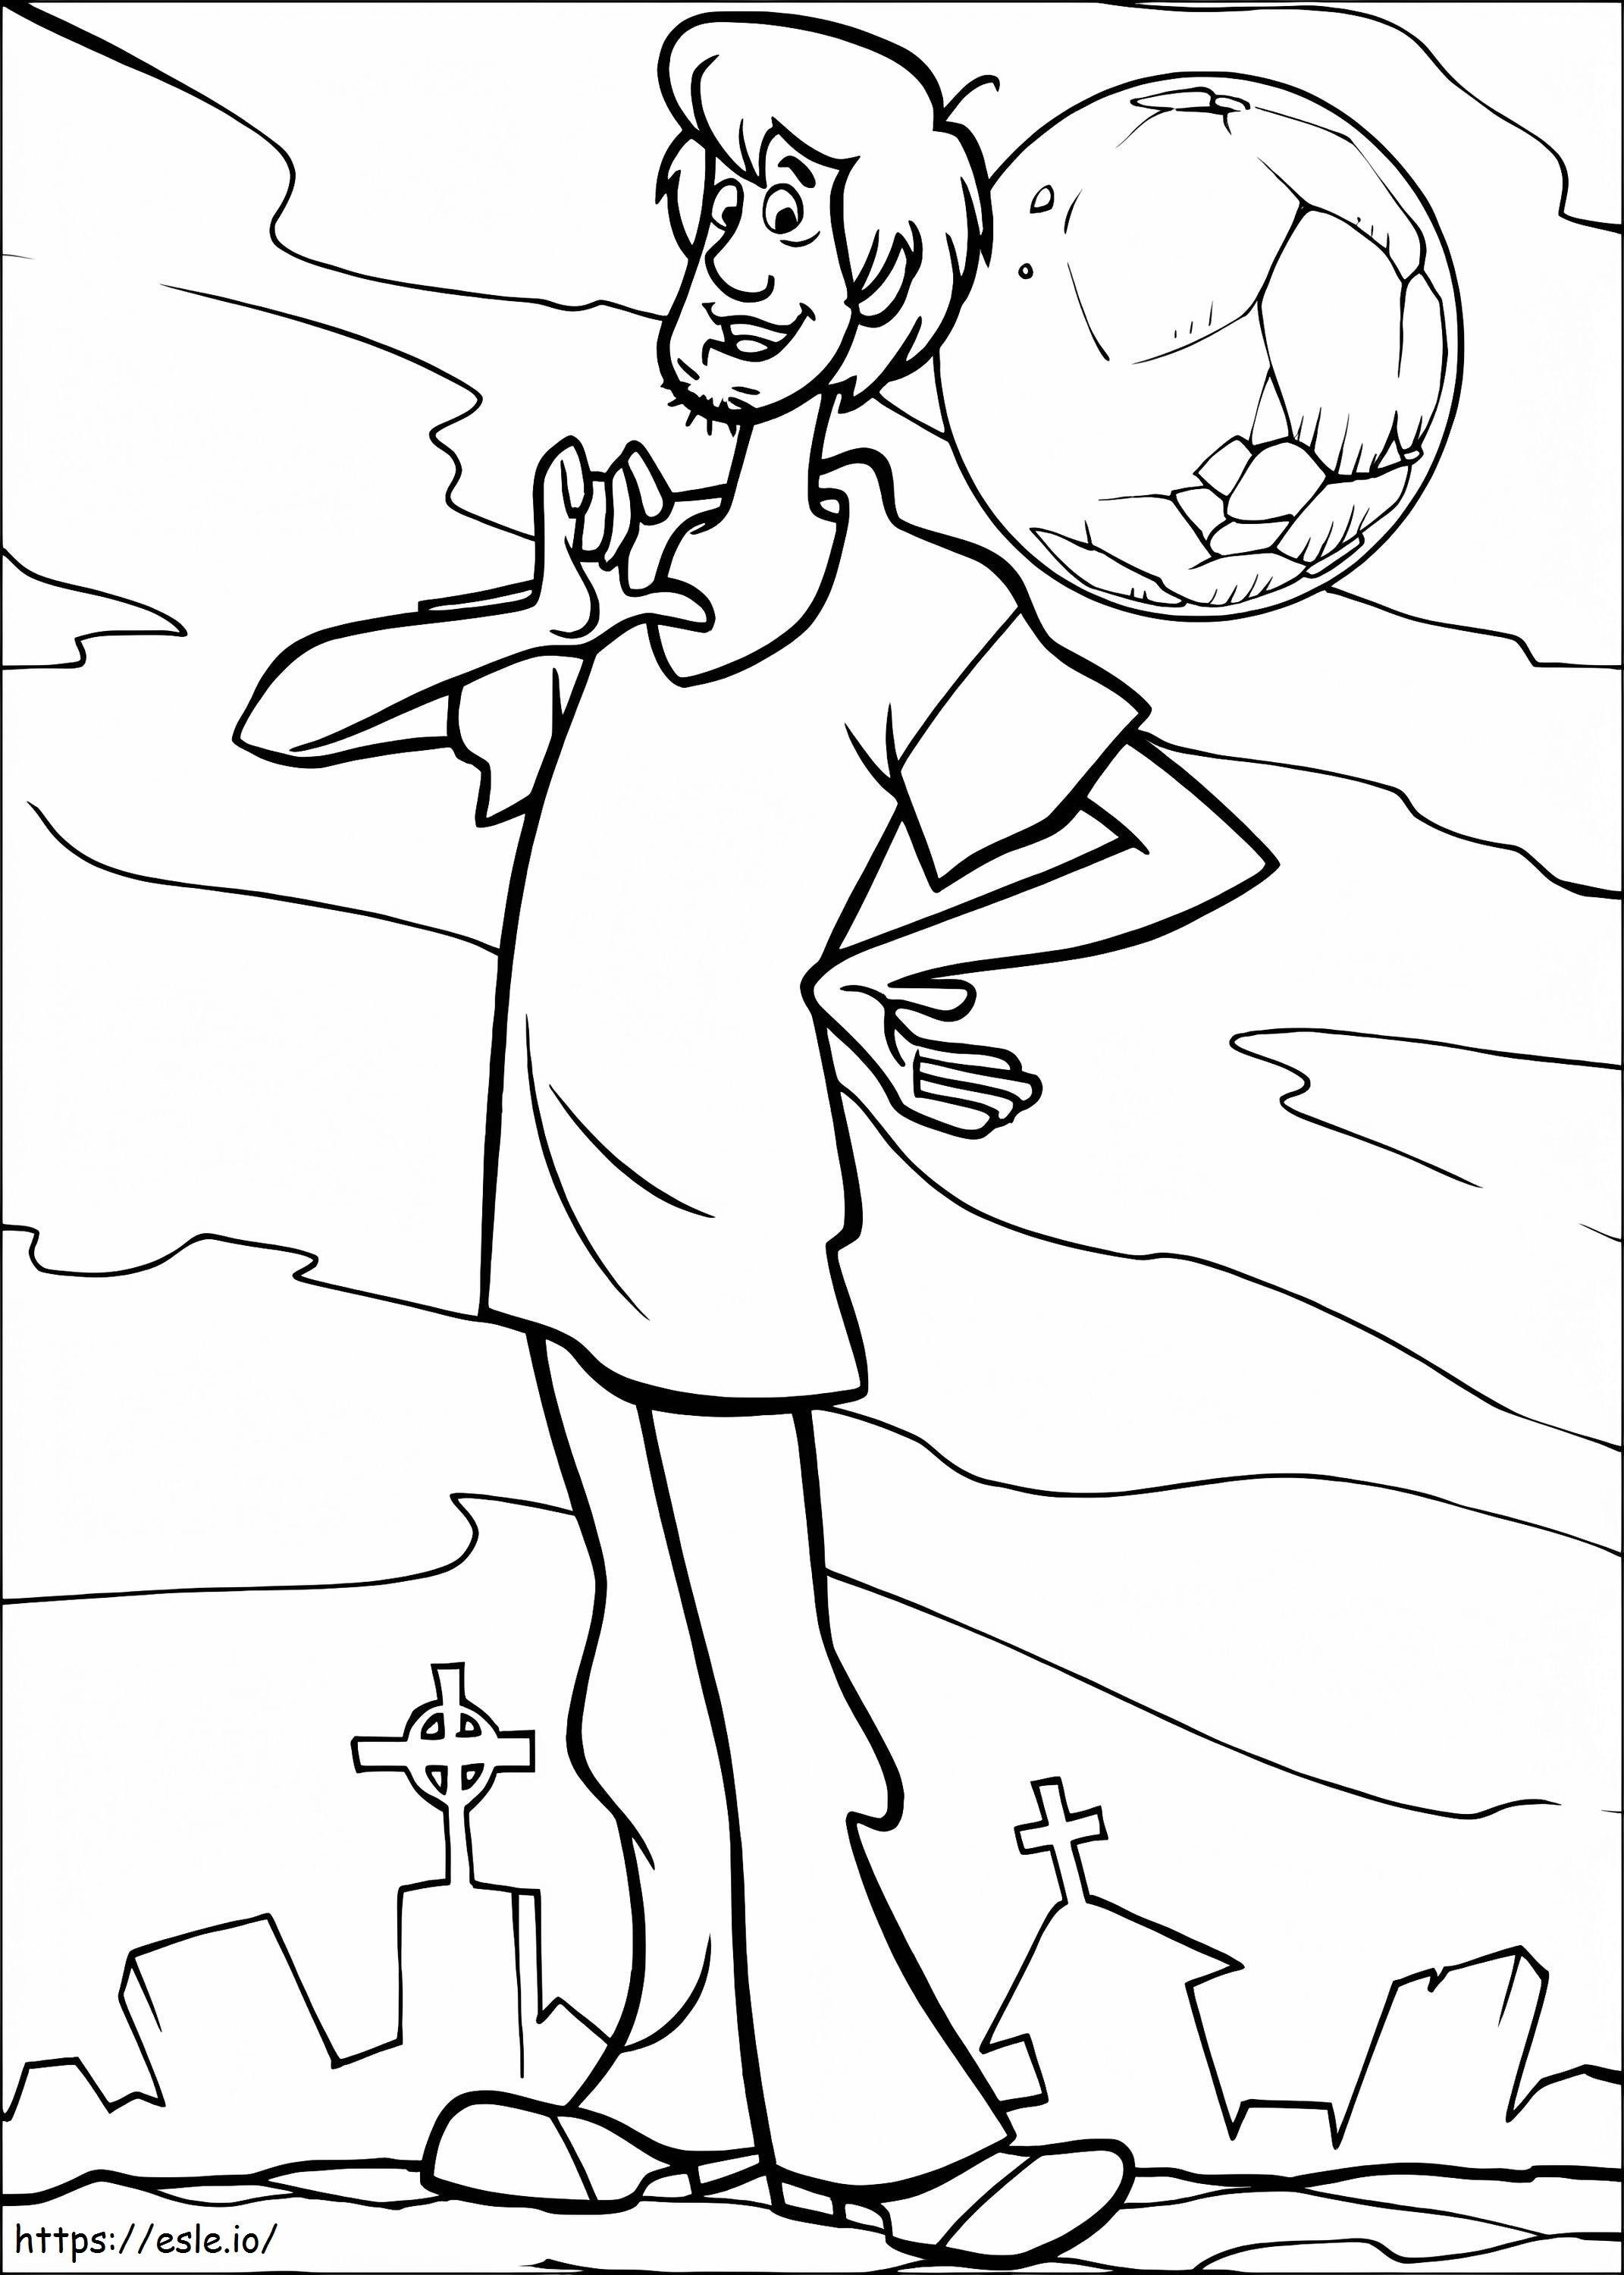 Shaggy At Cemetery coloring page